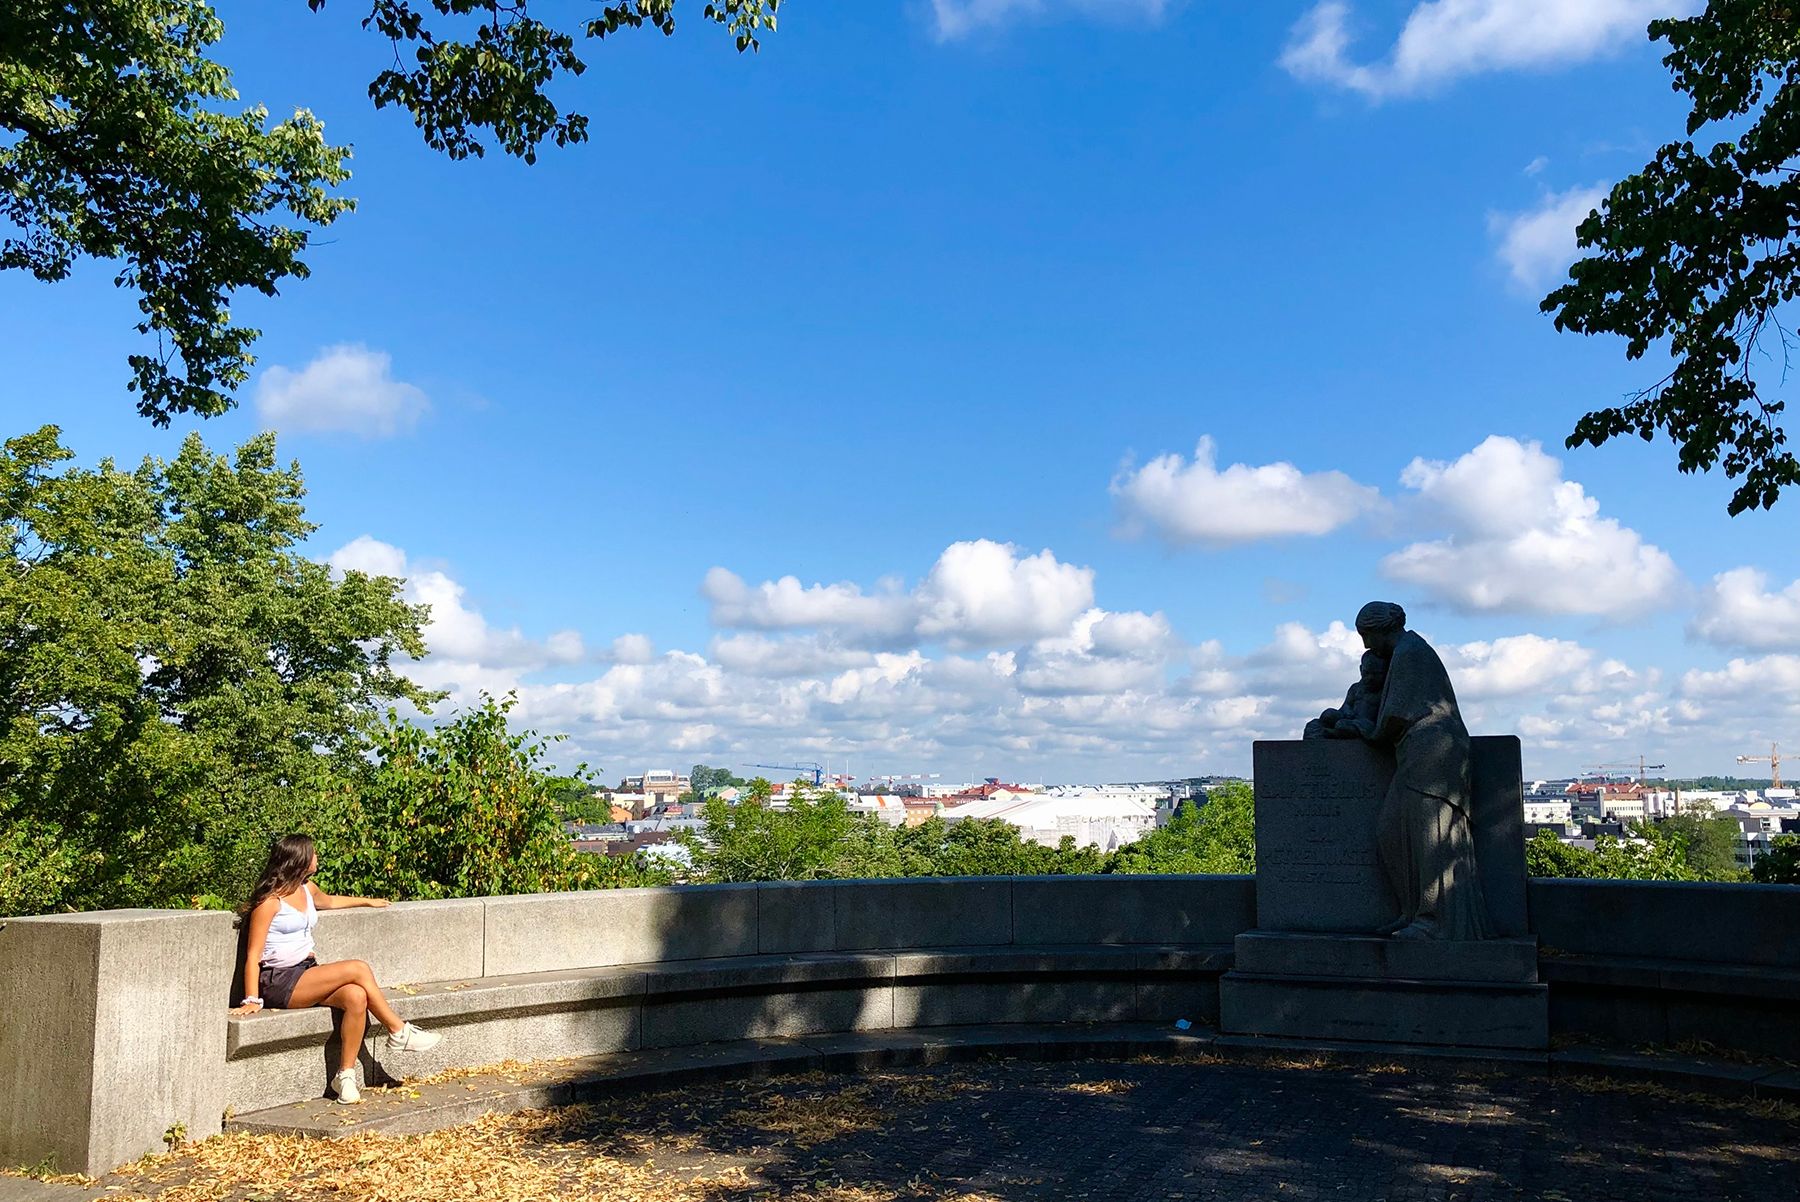 A person sits on the 11-metre wide concrete arch, part of the G. A. Petrelius monument, and looks towards the city.